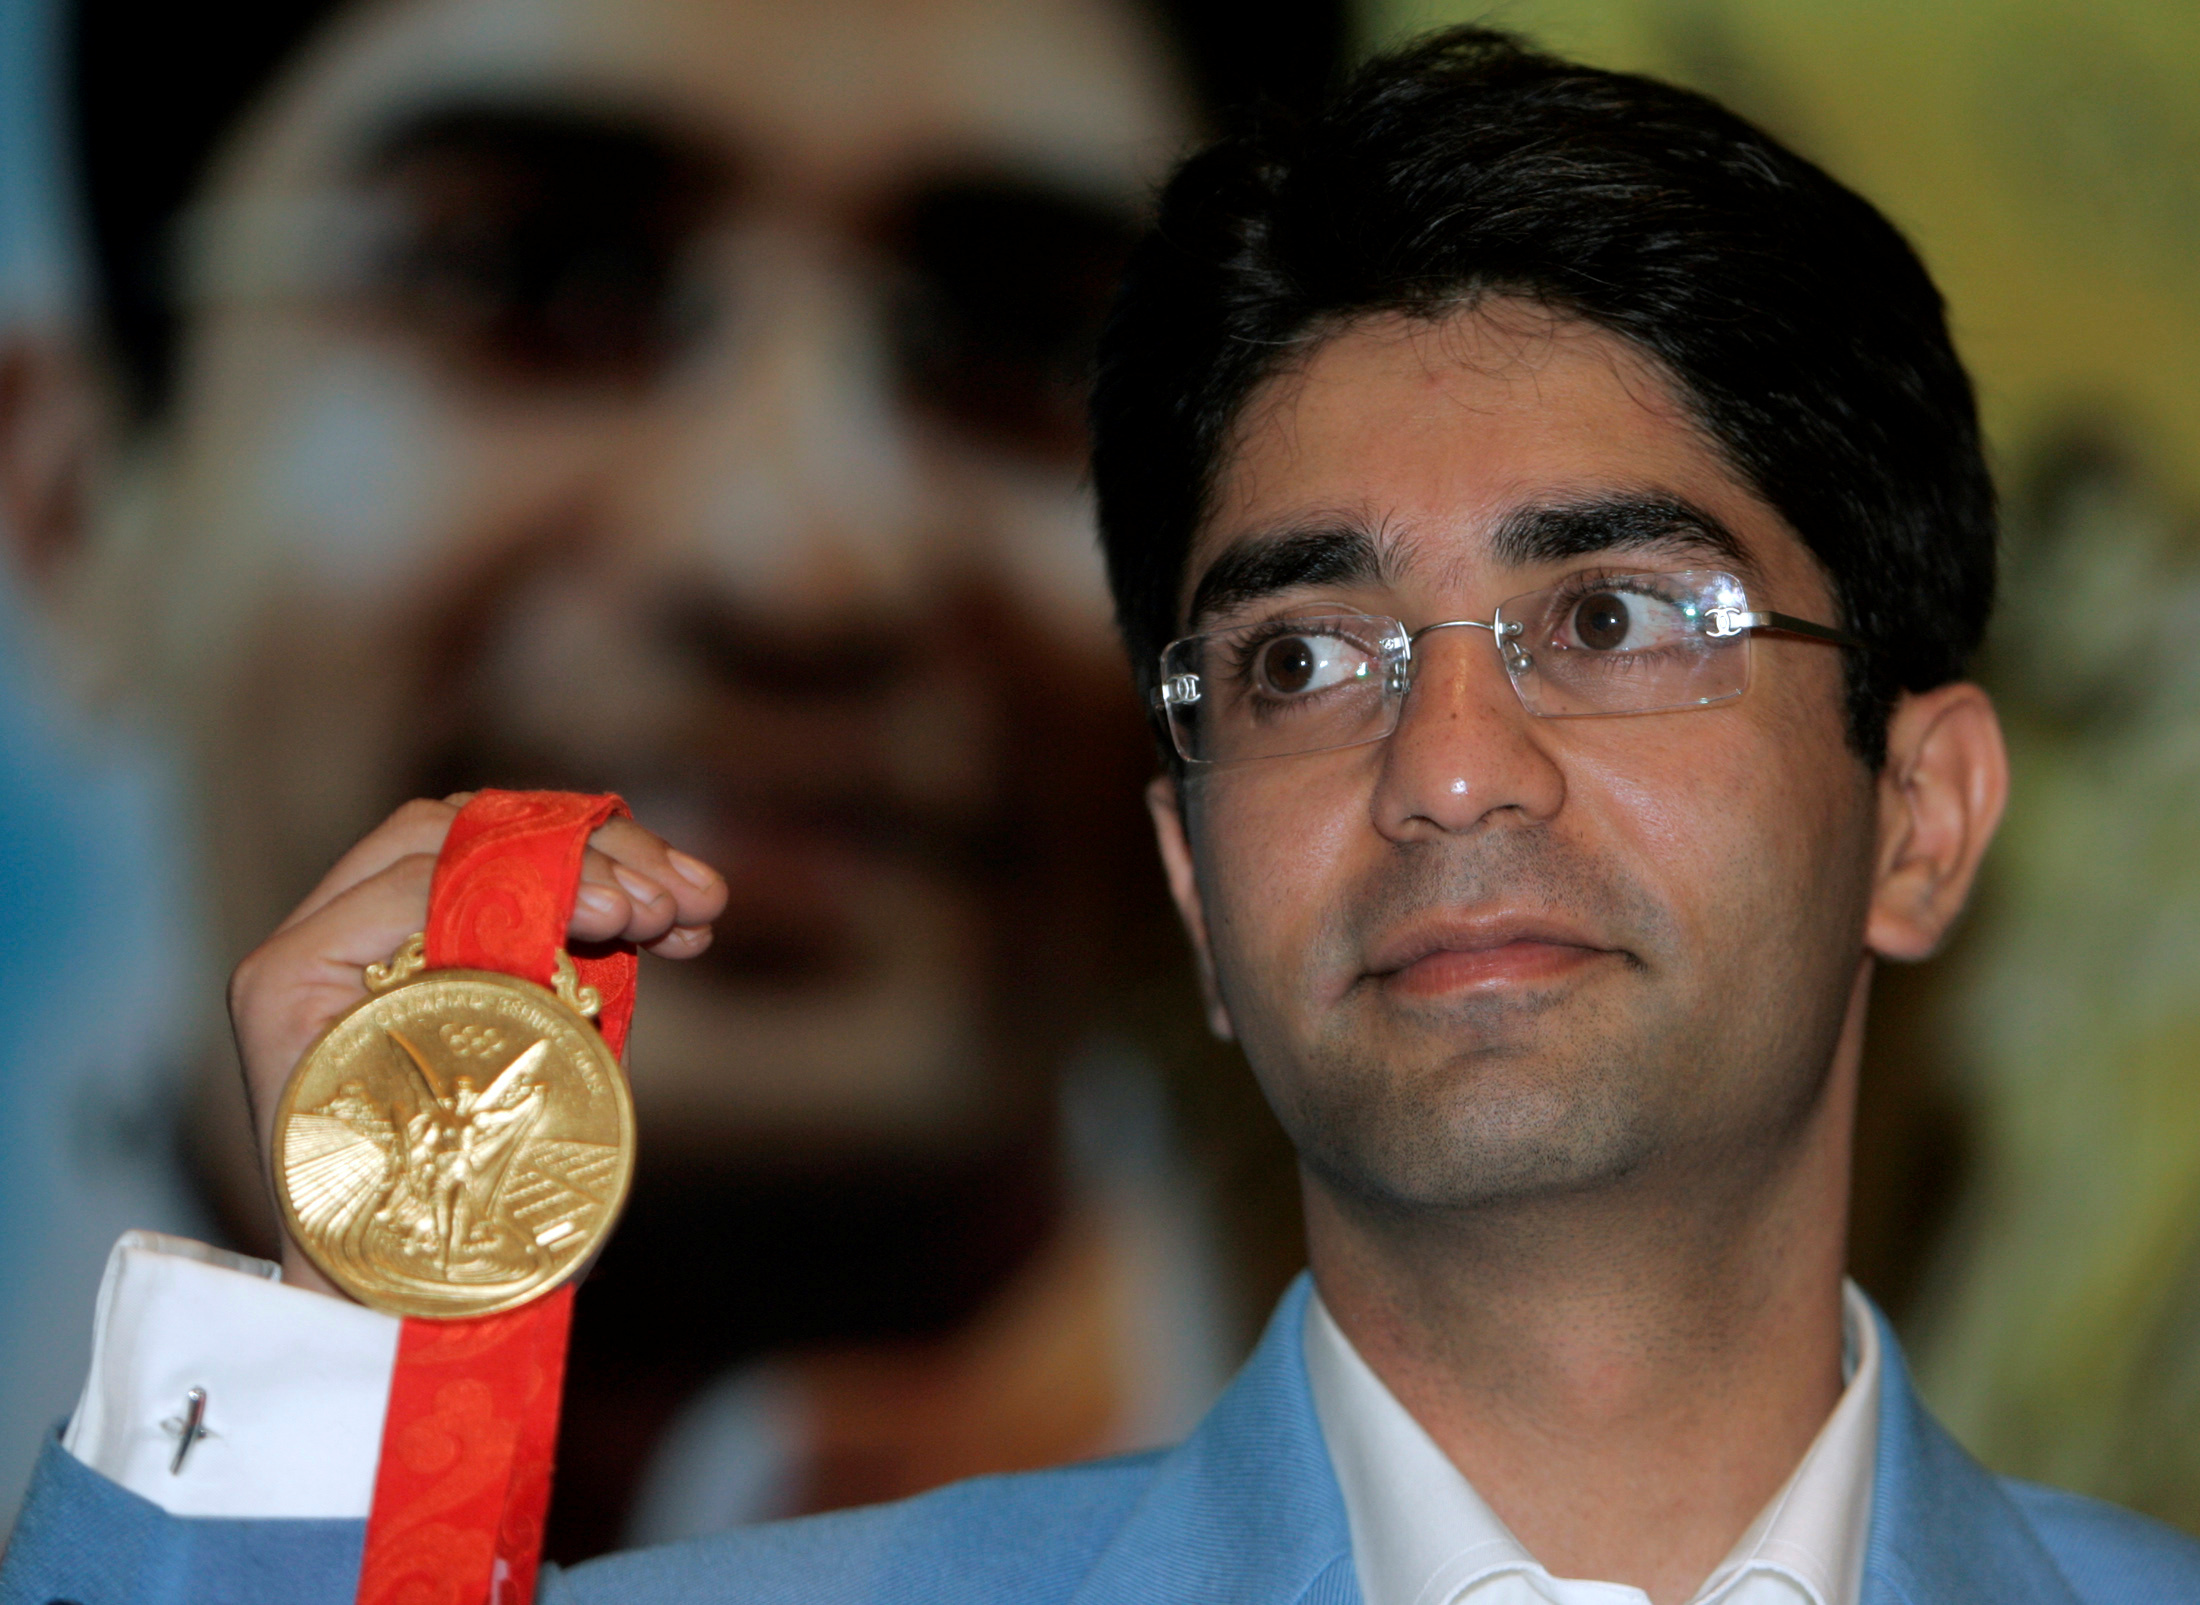 FILE PHOTO: Olympic men's 10m air rifle gold medalist Abhinav Bindra shows his gold medal during a news conference in New Delhi August 14, 2008. Ecstatic India lavished praise and nearly $400,000 in cash on shooter Bindra after he won the first solo Olympic title for a medal-starved nation. REUTERS/Parth Sanyal  (INDIA)/File Photo